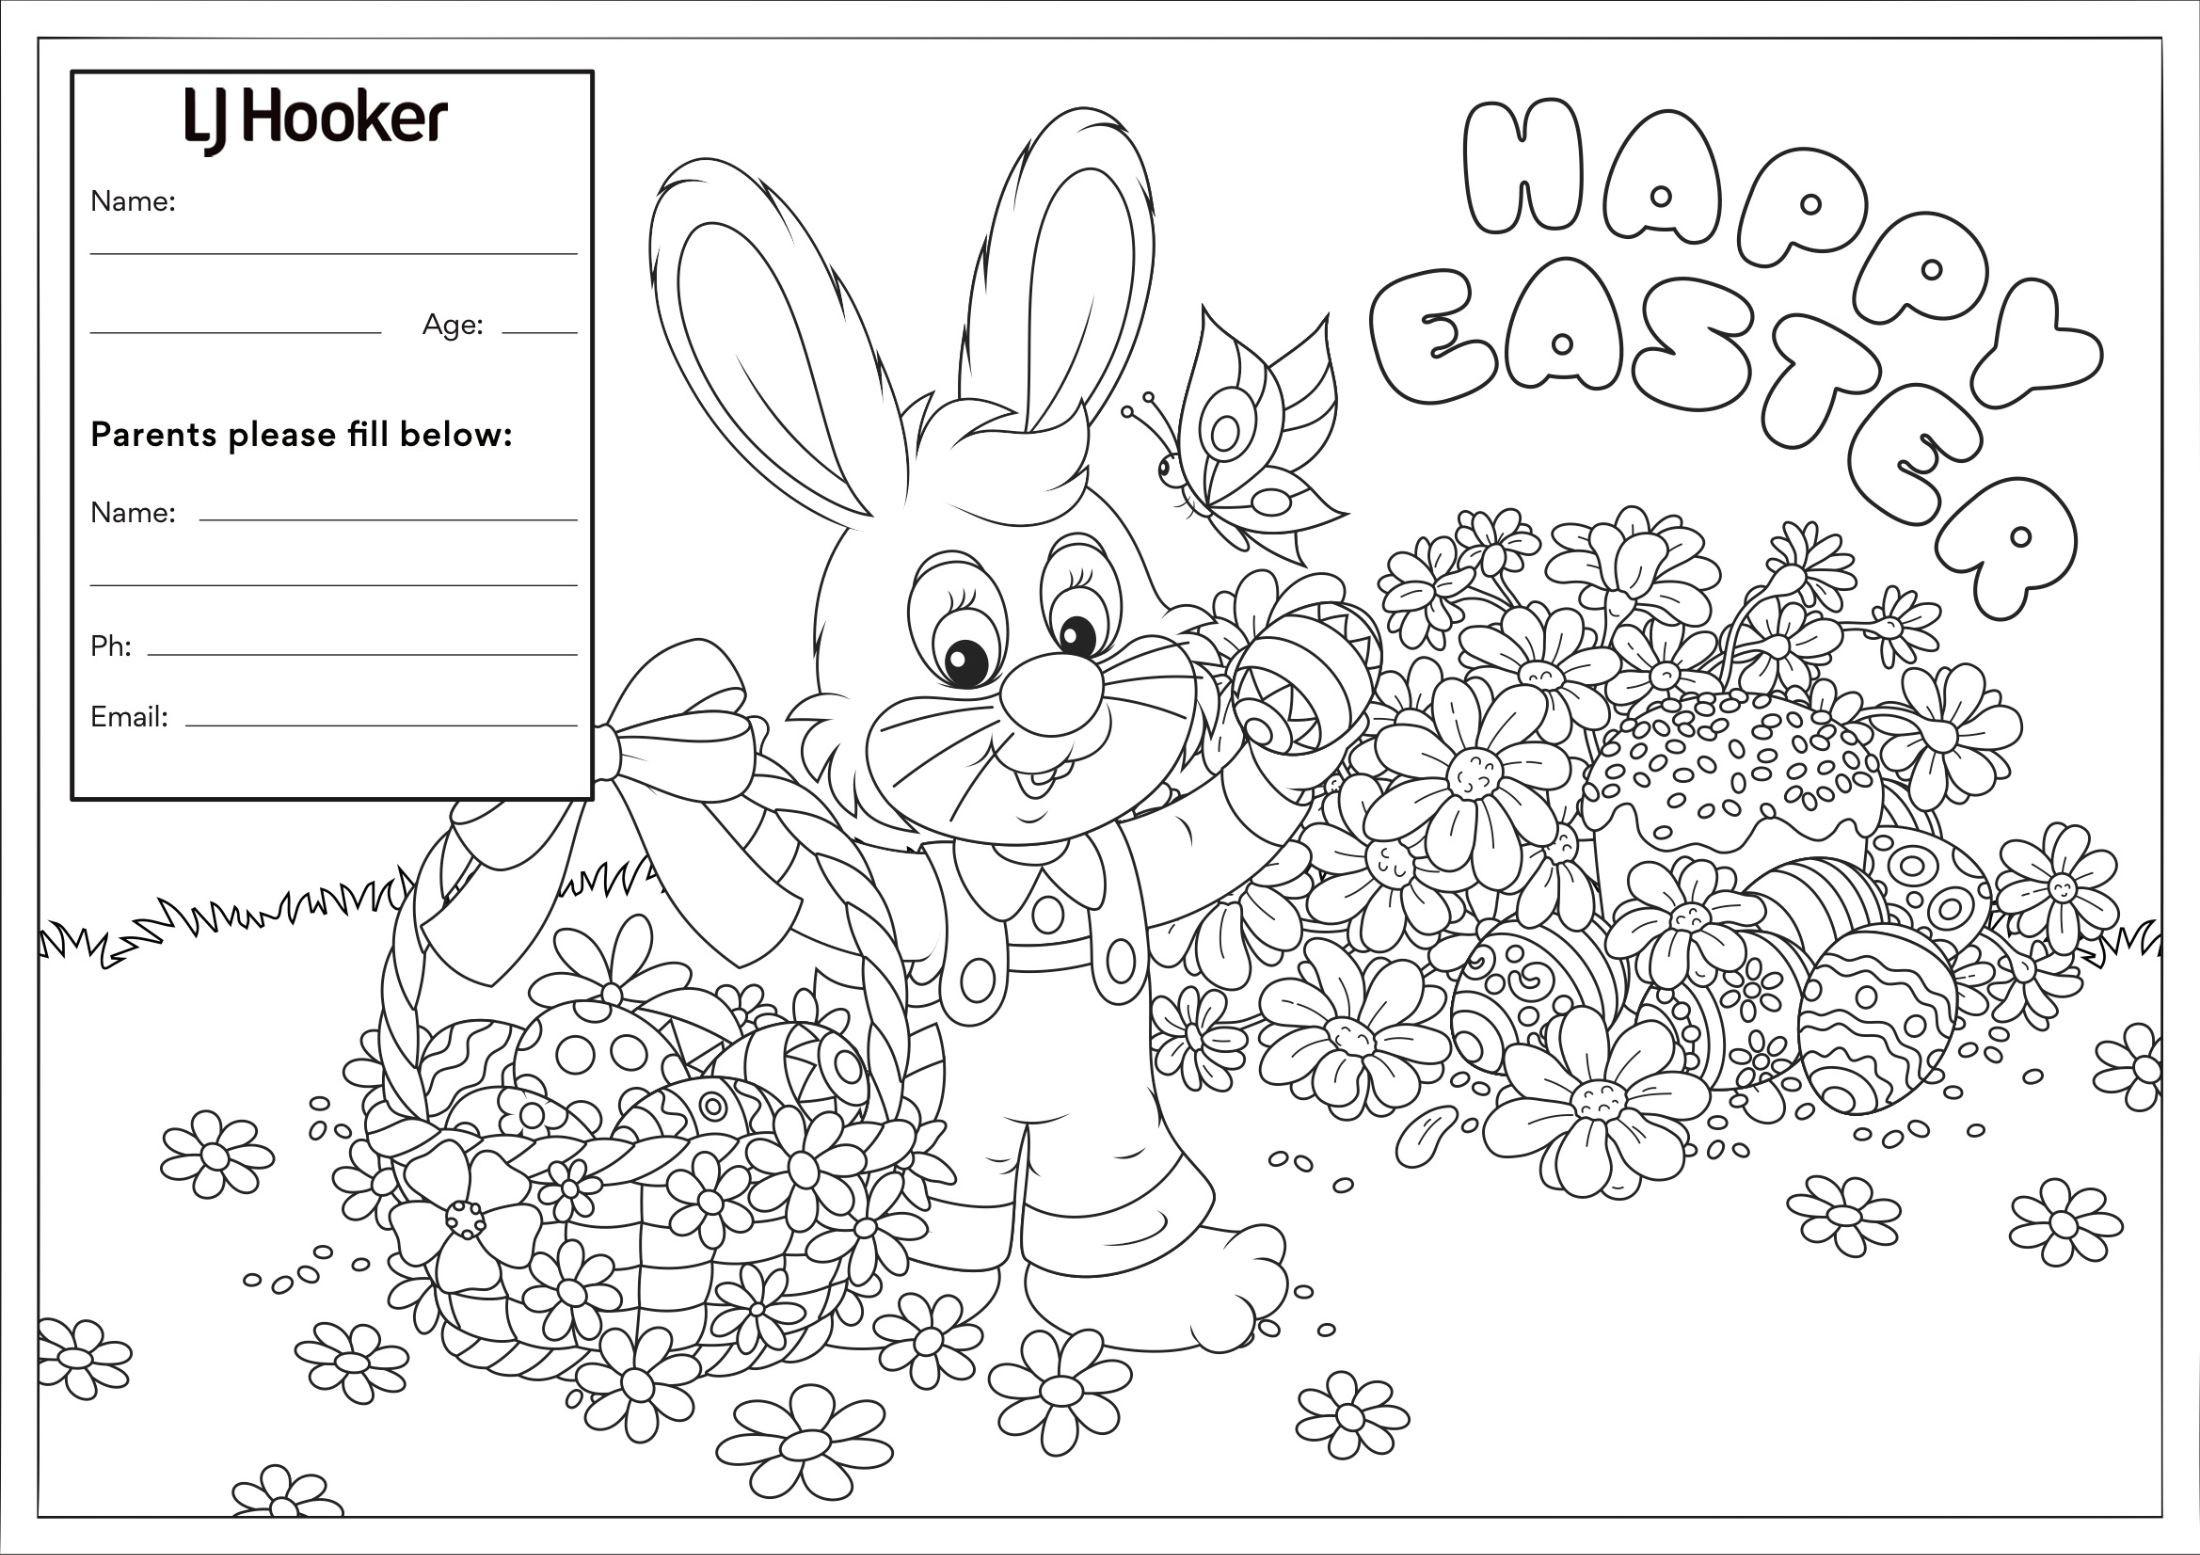 Ljh 2022 Easter Colouring Competition